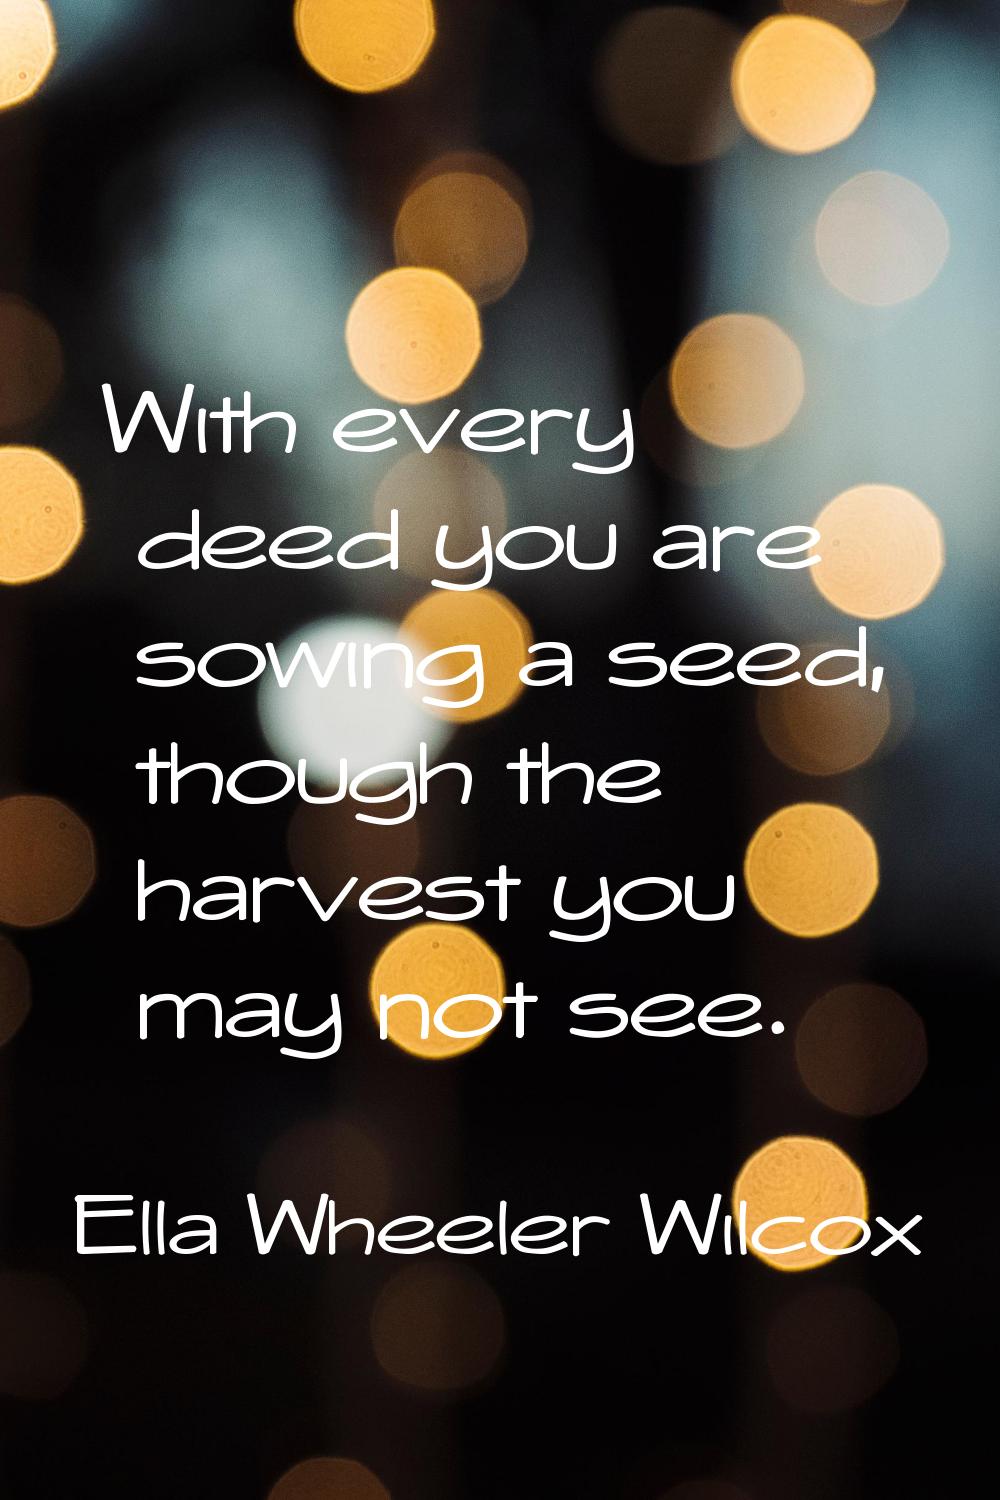 With every deed you are sowing a seed, though the harvest you may not see.